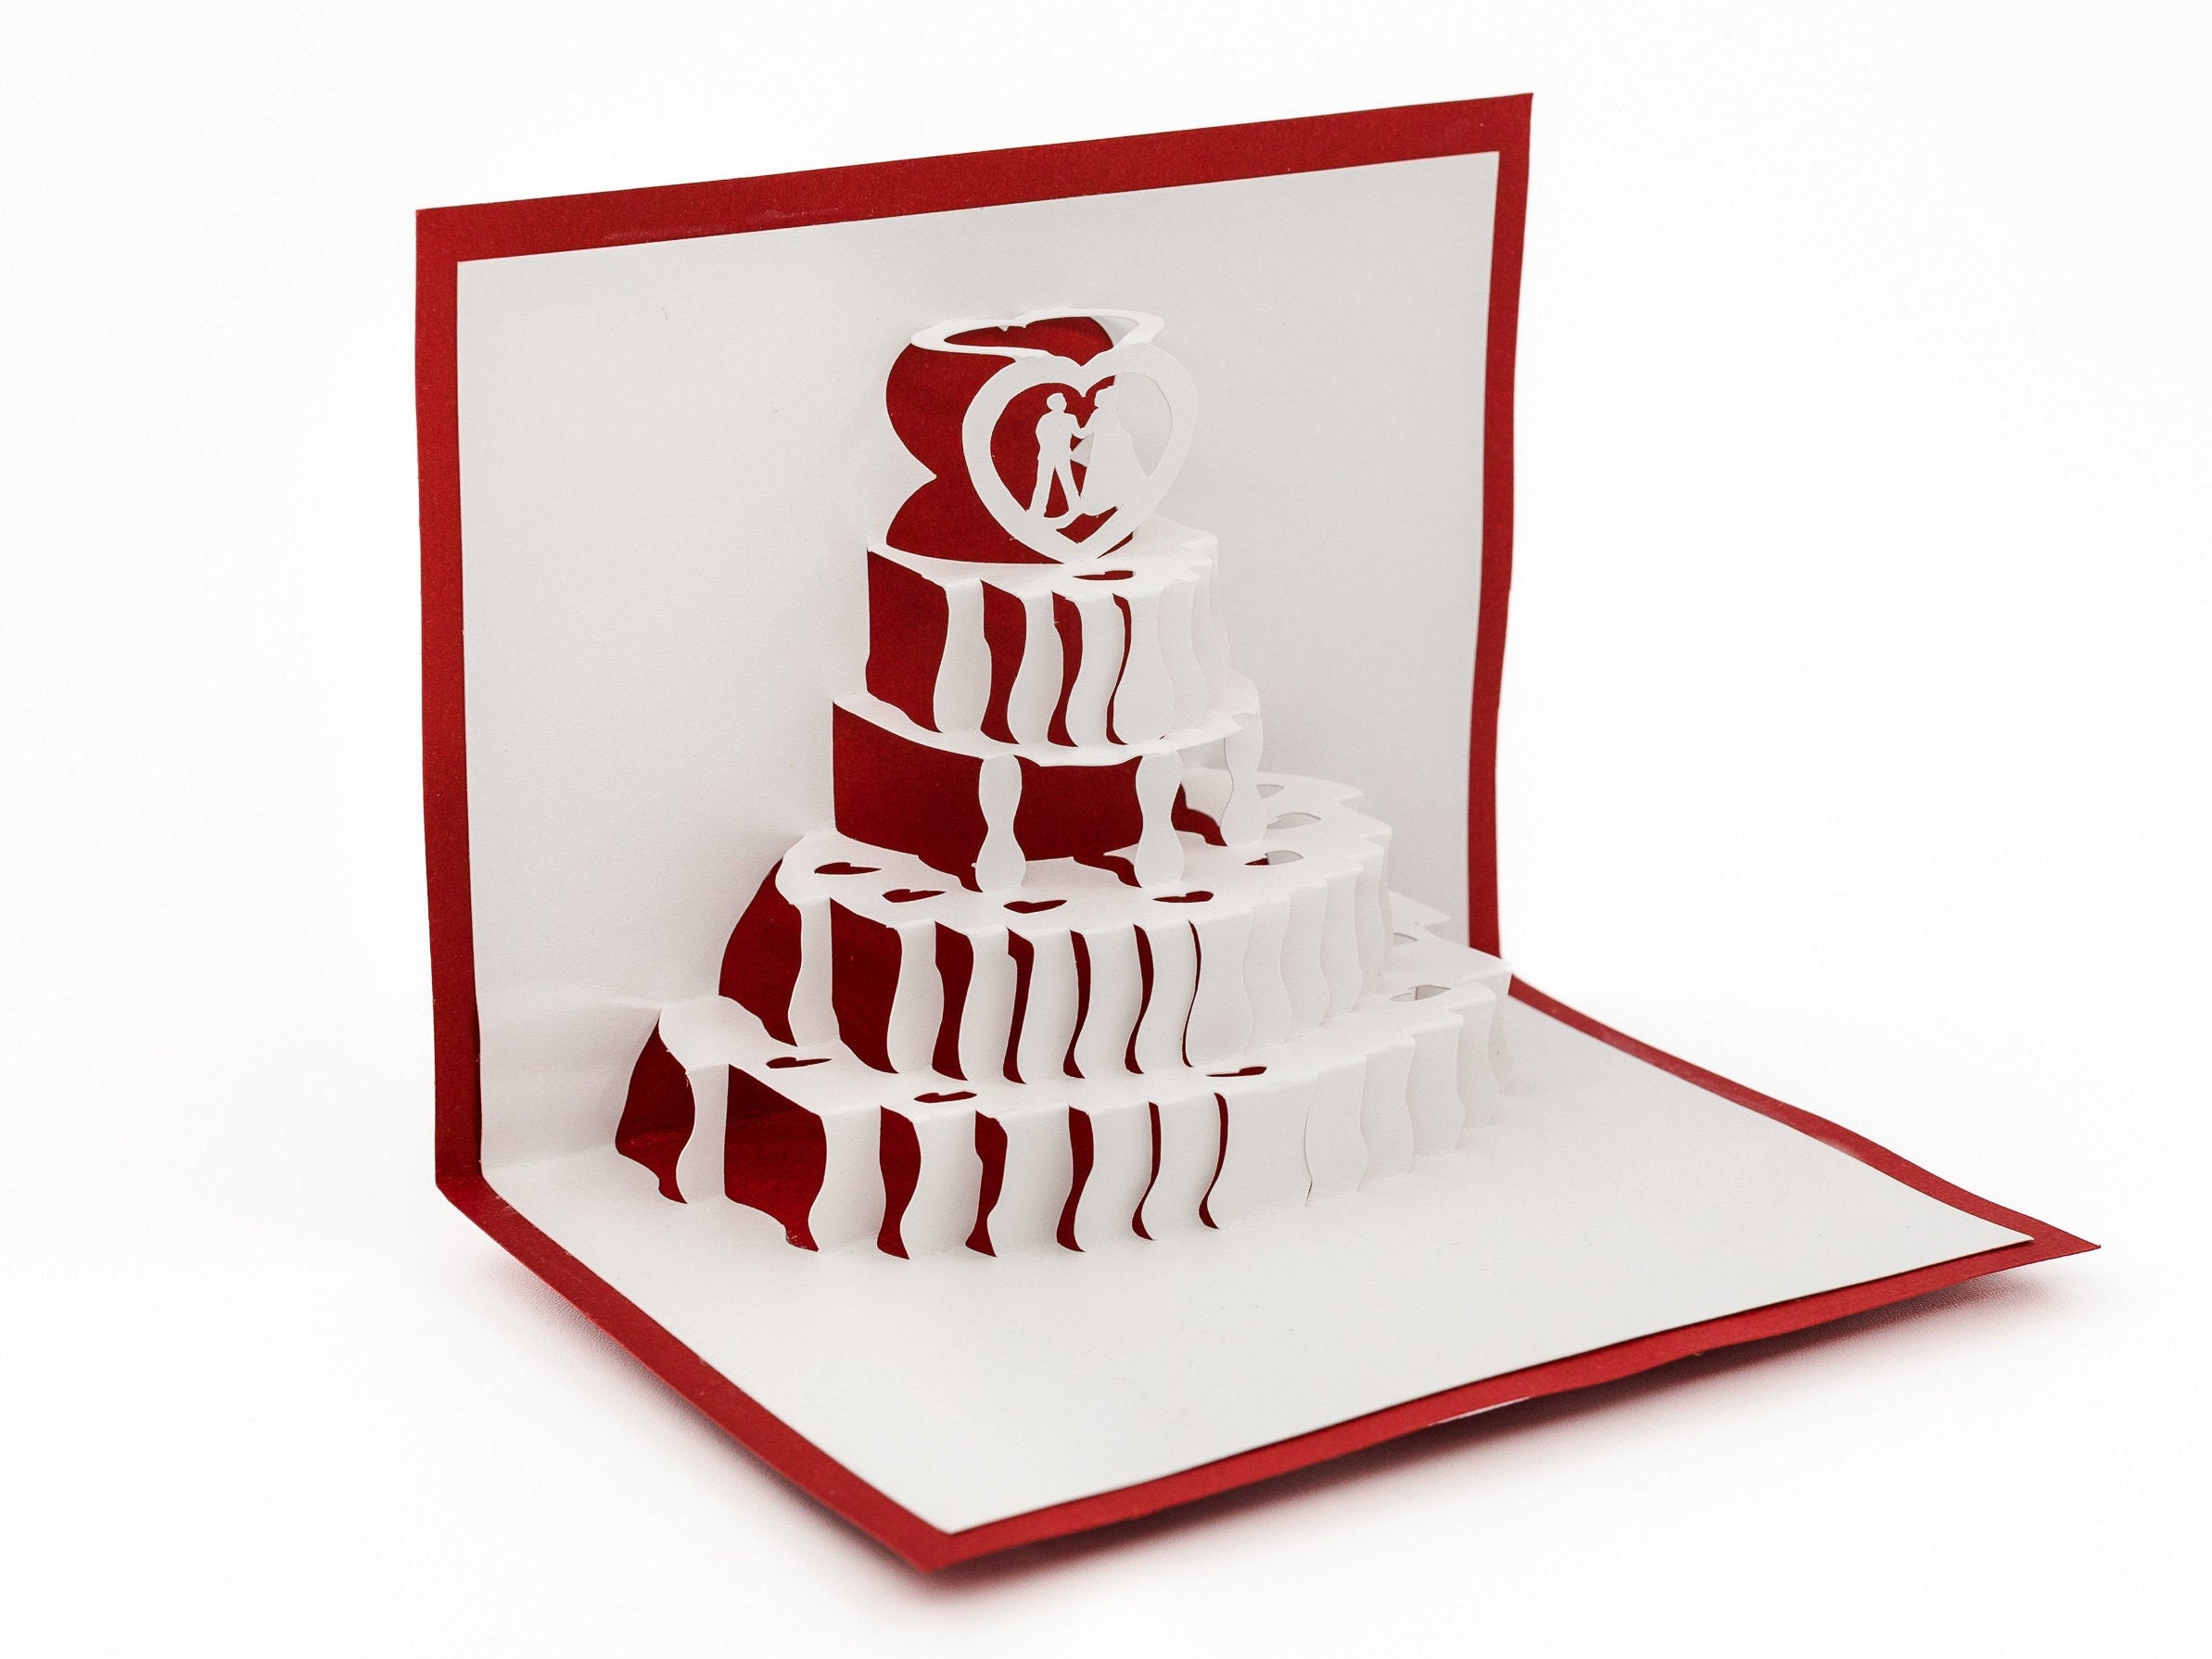 Wedding Cake 3D Pop Up Card | Anniversary and Engagement | Wedding Planner Gift | Handmade Card | Husband and Wife Card | Cake Decor